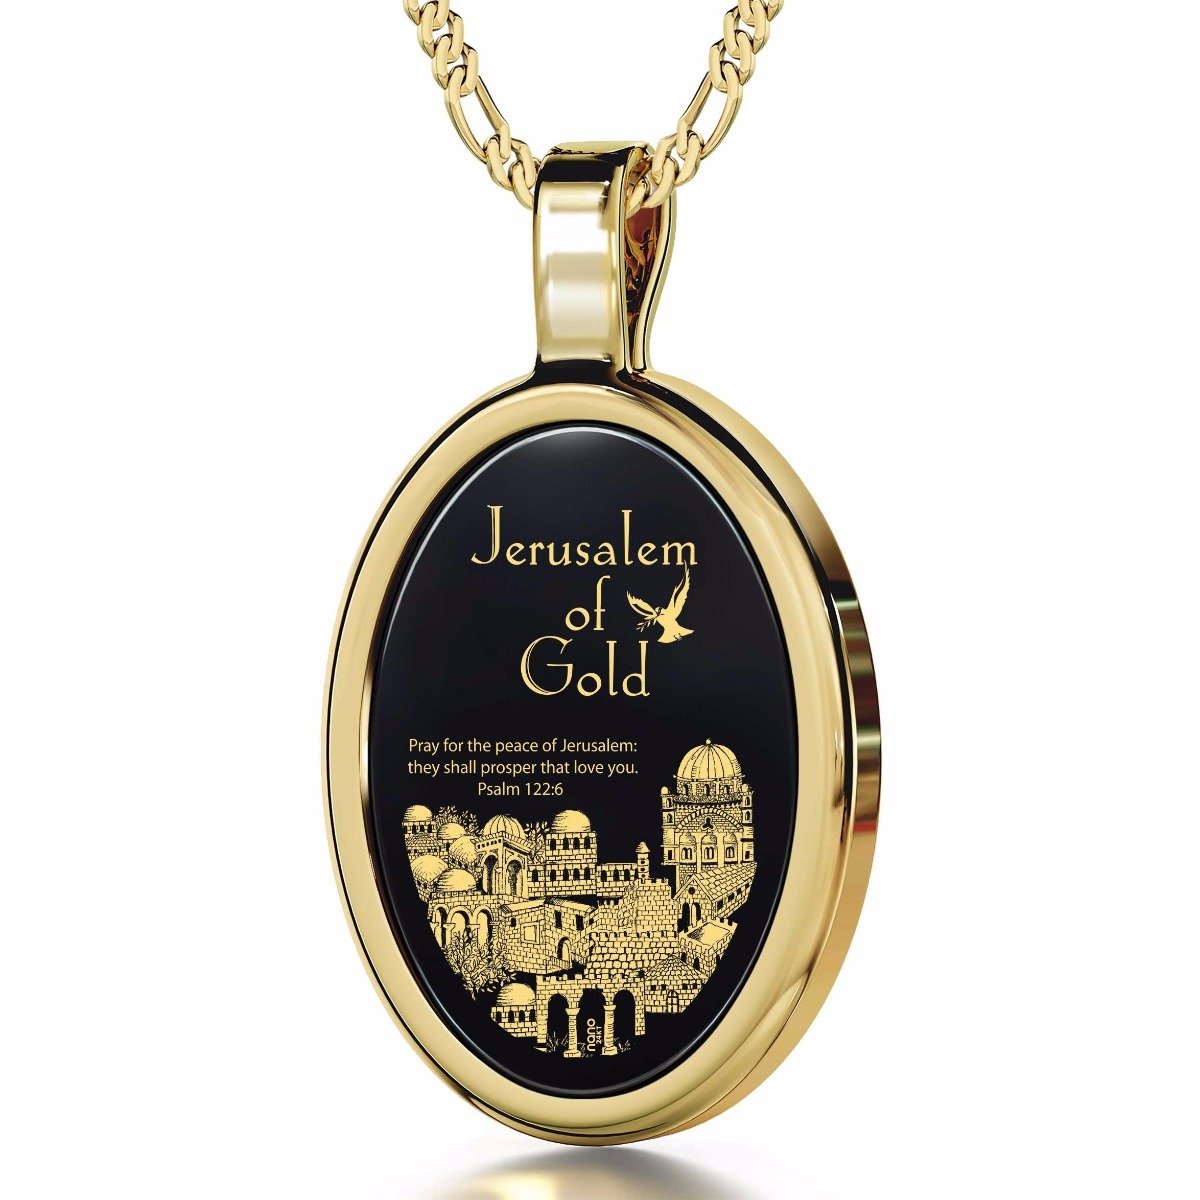 Jerusalem of Gold: 14K Gold and Onyx Necklace Micro-Inscribed with 24K Gold - 1